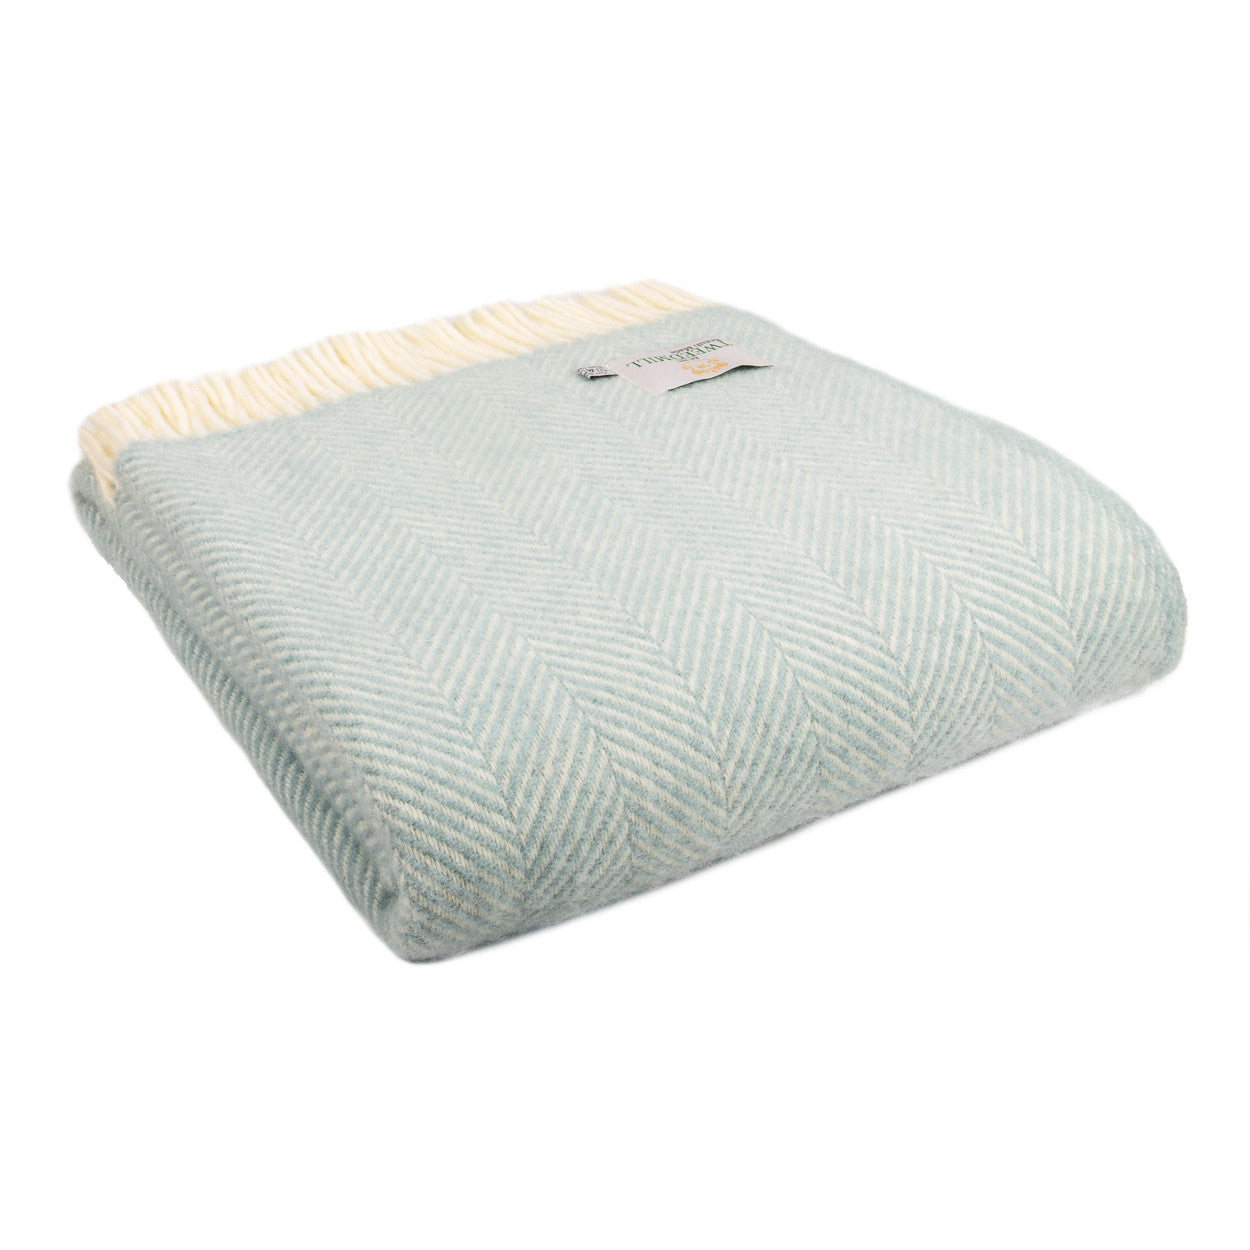 Fishbone Knee Blankets - Pure New Wool Made in the UK by Tweedmill